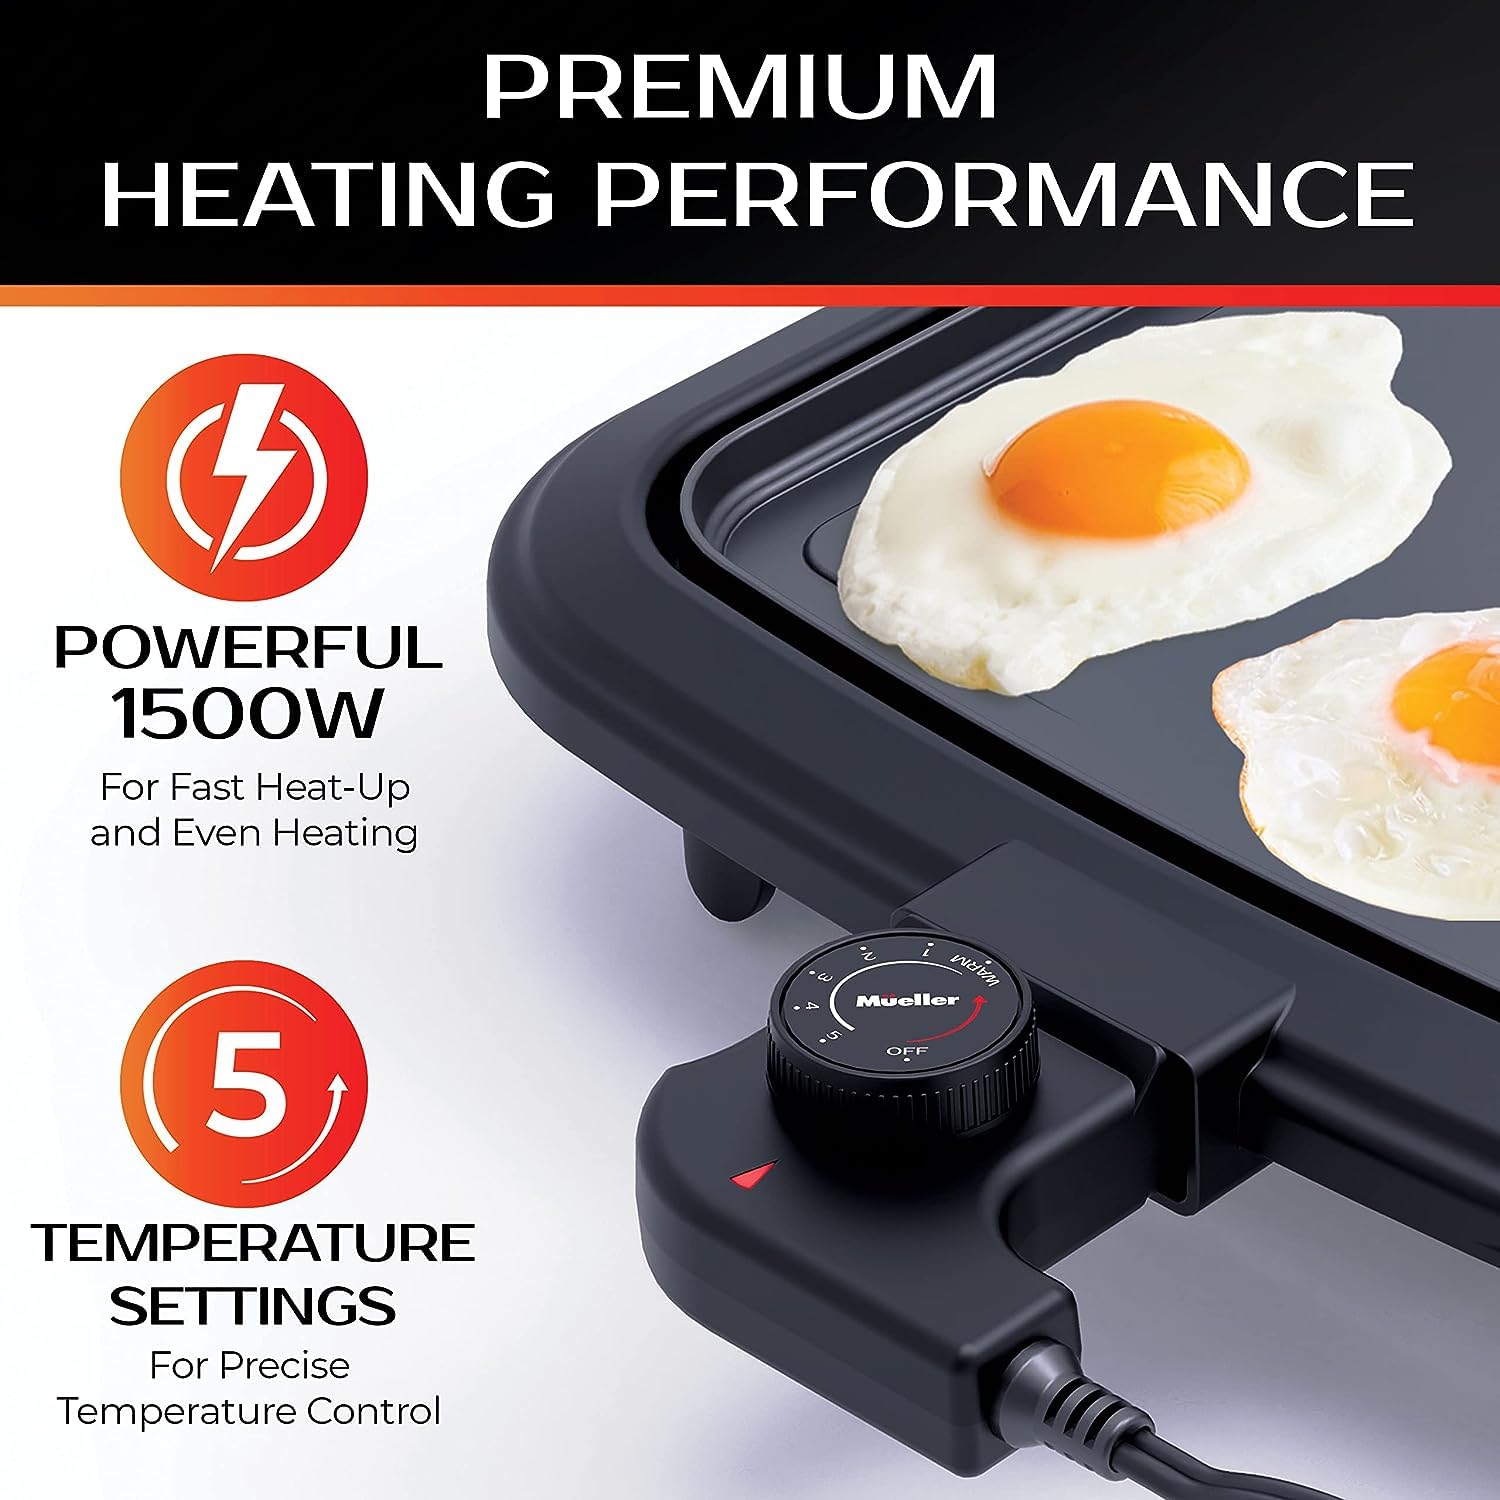 Mueller HealthyBites Electric Griddle Nonstick, 20 Inch Eco Pancake Griddle Grill Teflon-free, 10 Eggs at Once, Cool-Touch Handles & Slide-Out Drip Tray, for Breakfast Pancakes, Burgers, Eggs